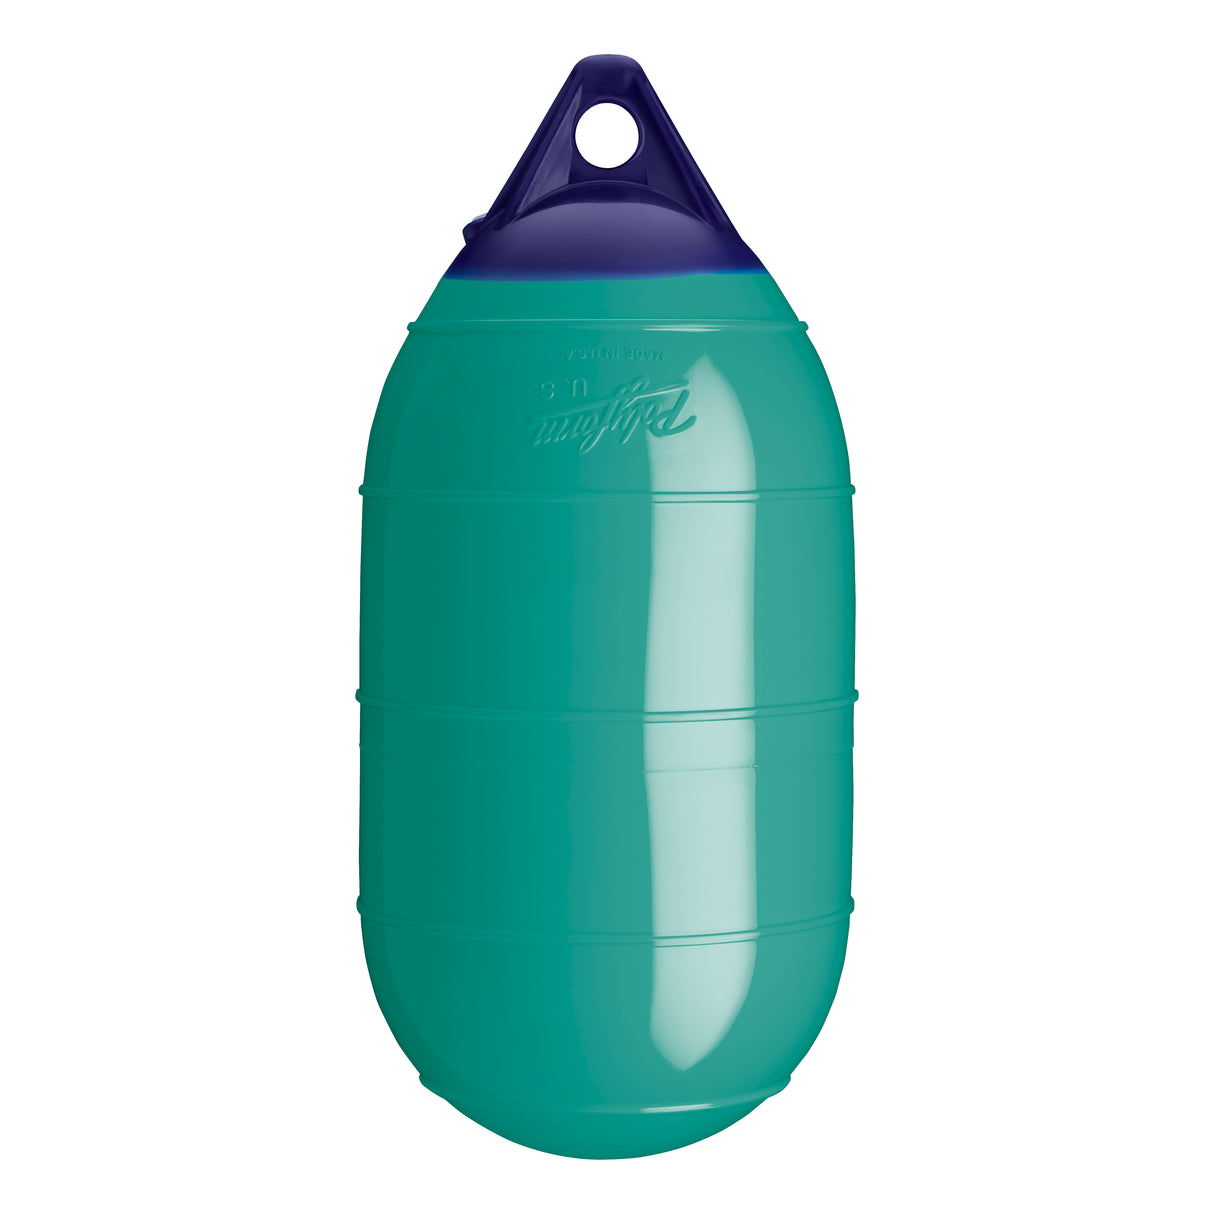 Teal inflatable low drag buoy, Polyform LD-1 